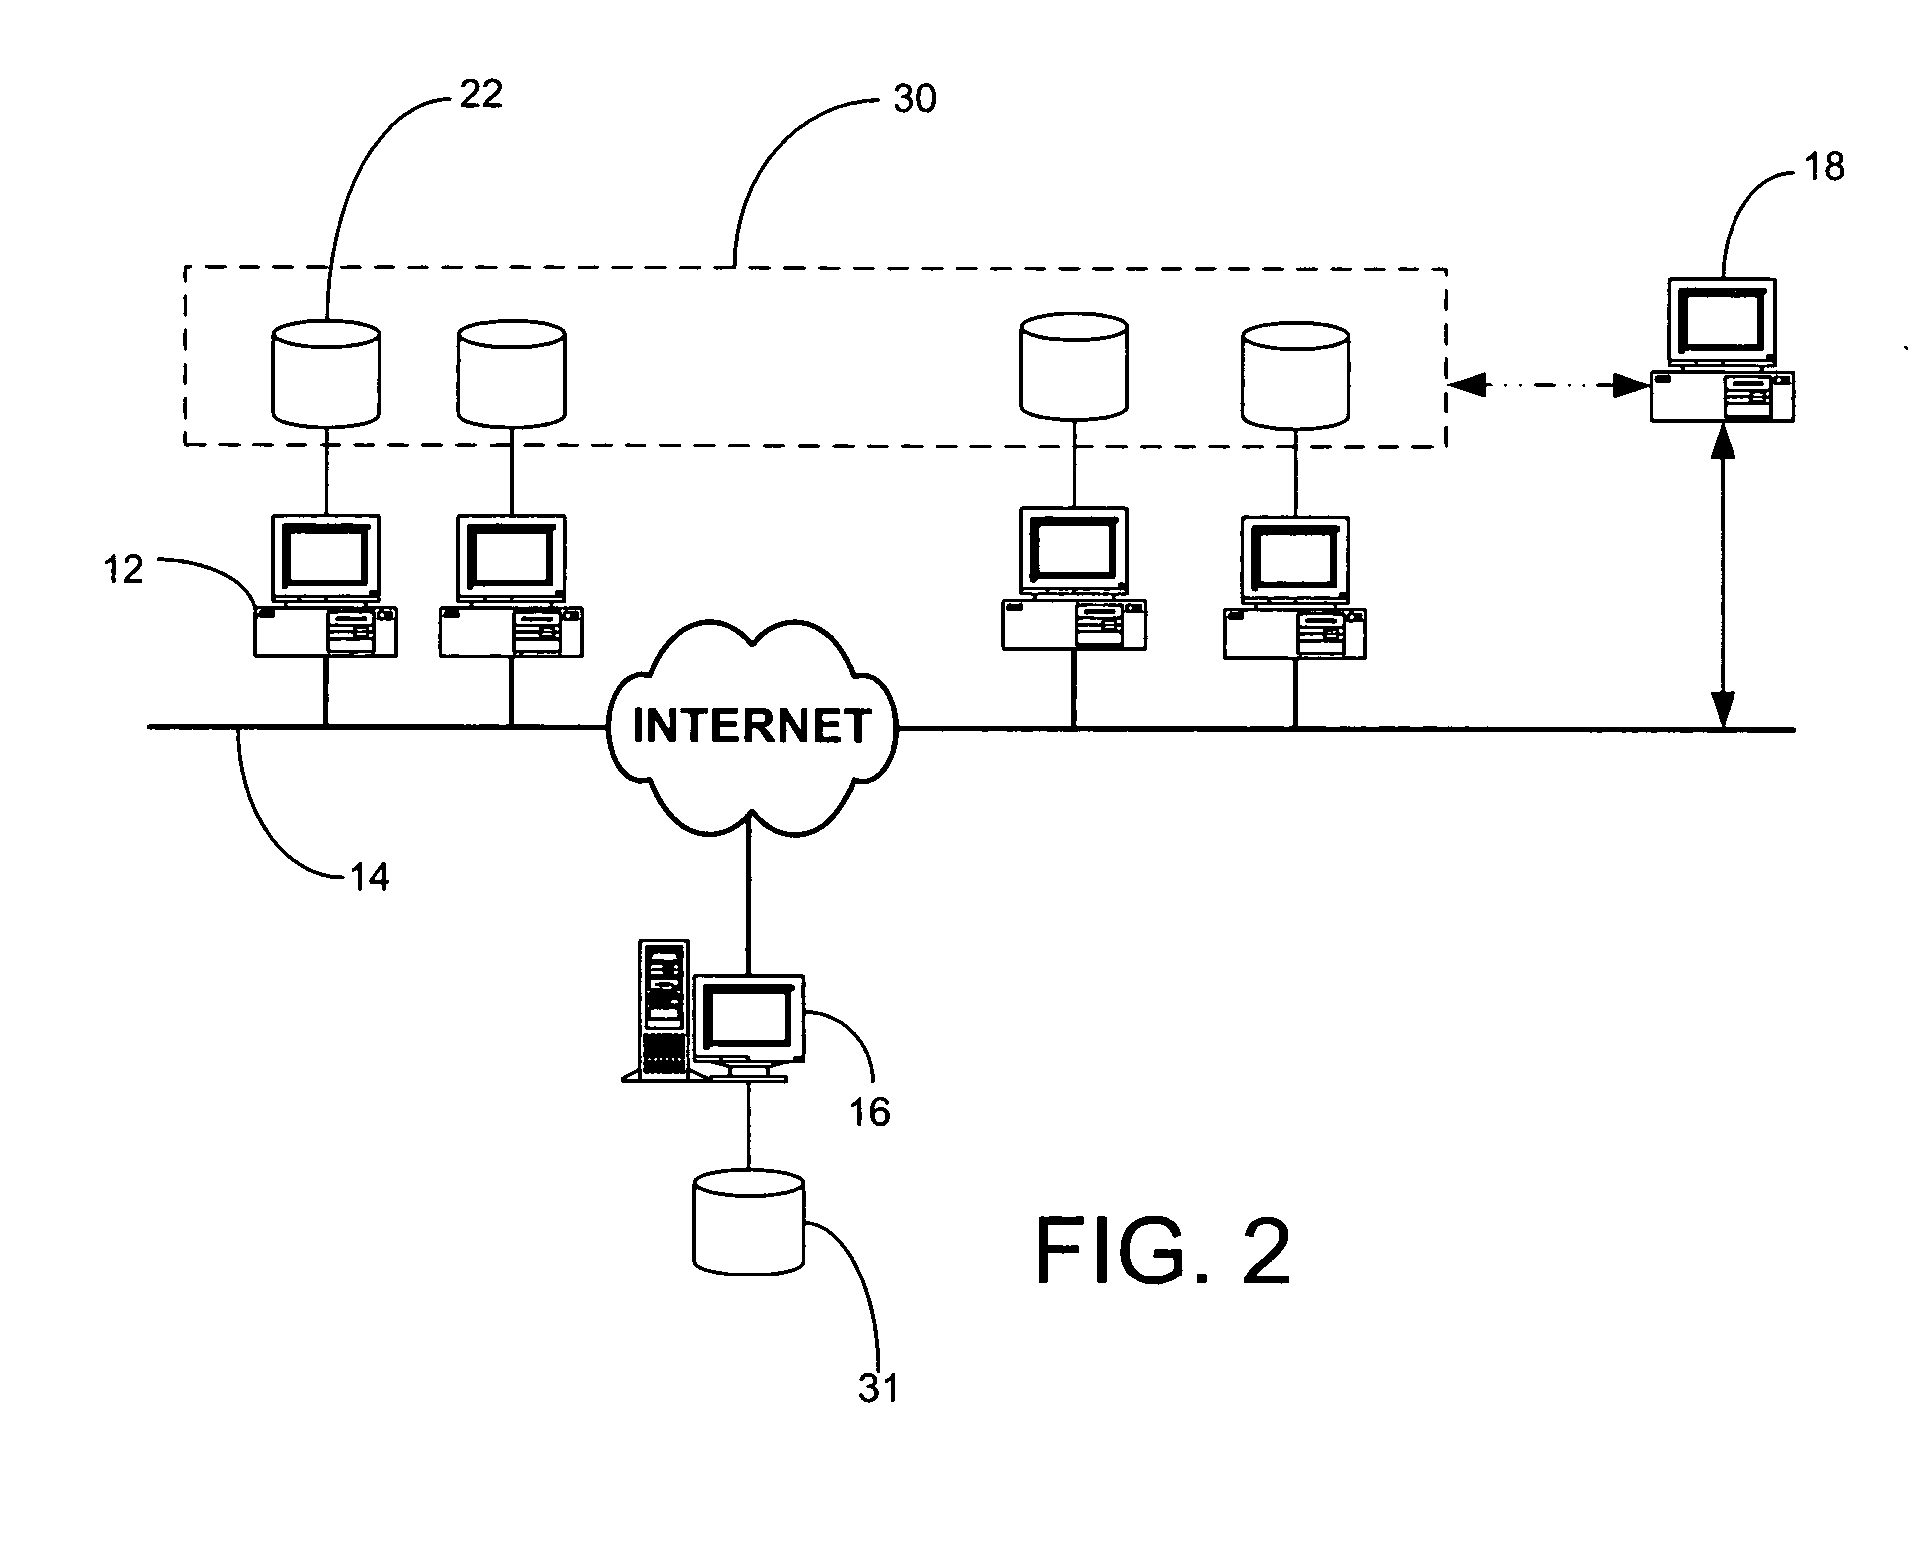 System for consolidating disk storage space of grid computers into a single virtual disk drive